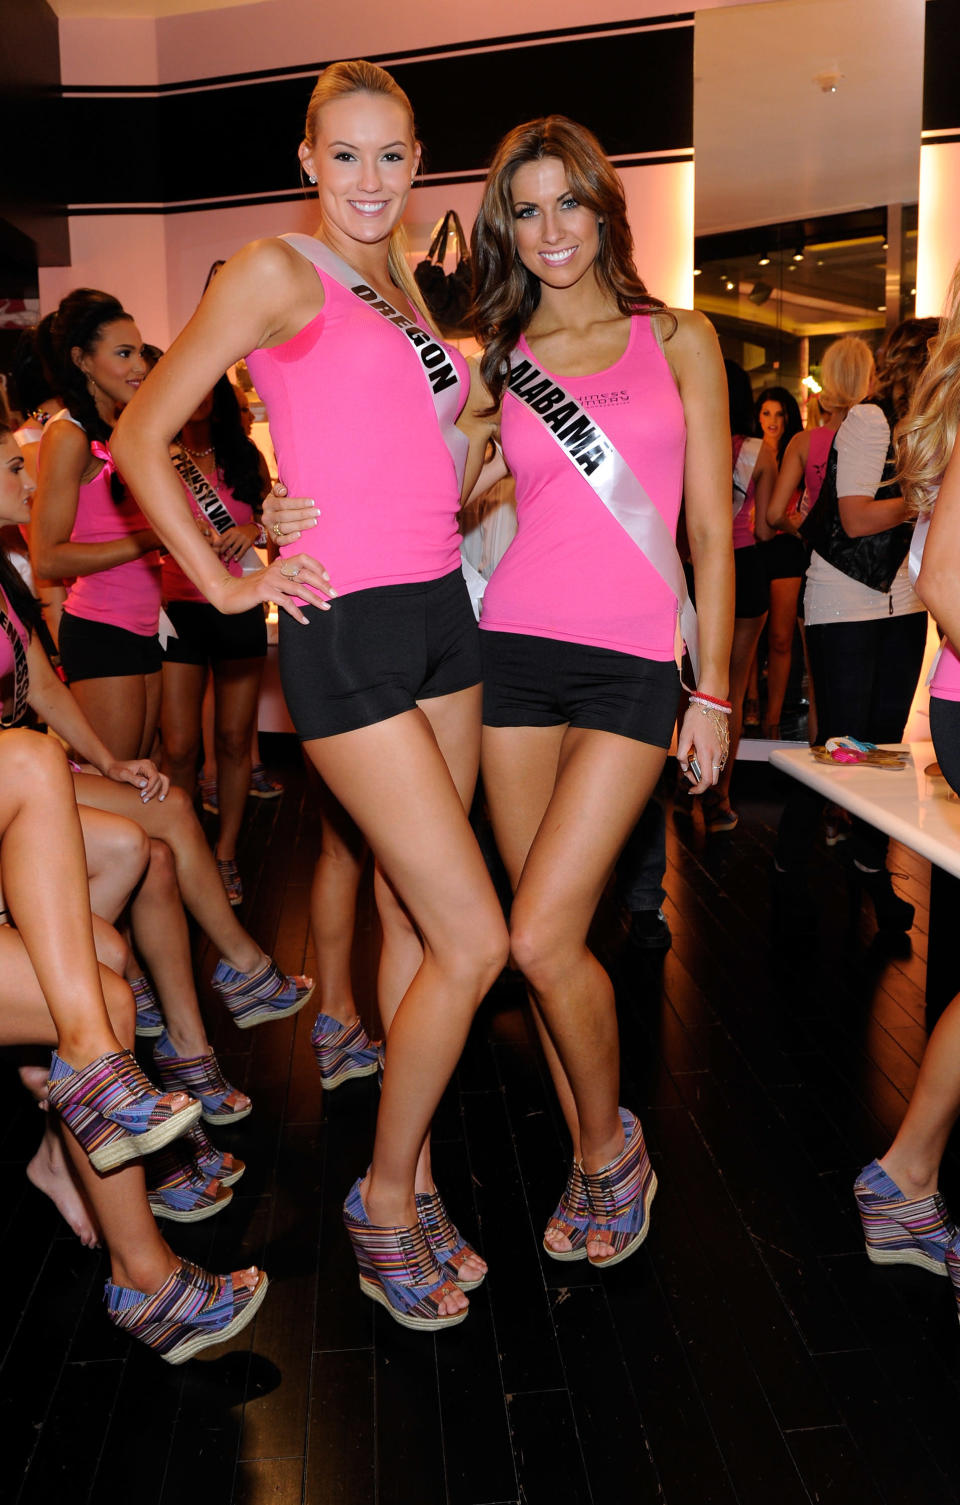 Miss Orgeon USA Alaina Bergsma (L) and Miss Alabama USA Katherine Webb appear at the Chinese Laundry before competing in the Miss USA 2012 Wedge Run at the Planet Hollywood Resort & Casino on May 22, 2012 in Las Vegas, Nevada. (Photo by David Becker/Getty Images For Chinese Laundry)